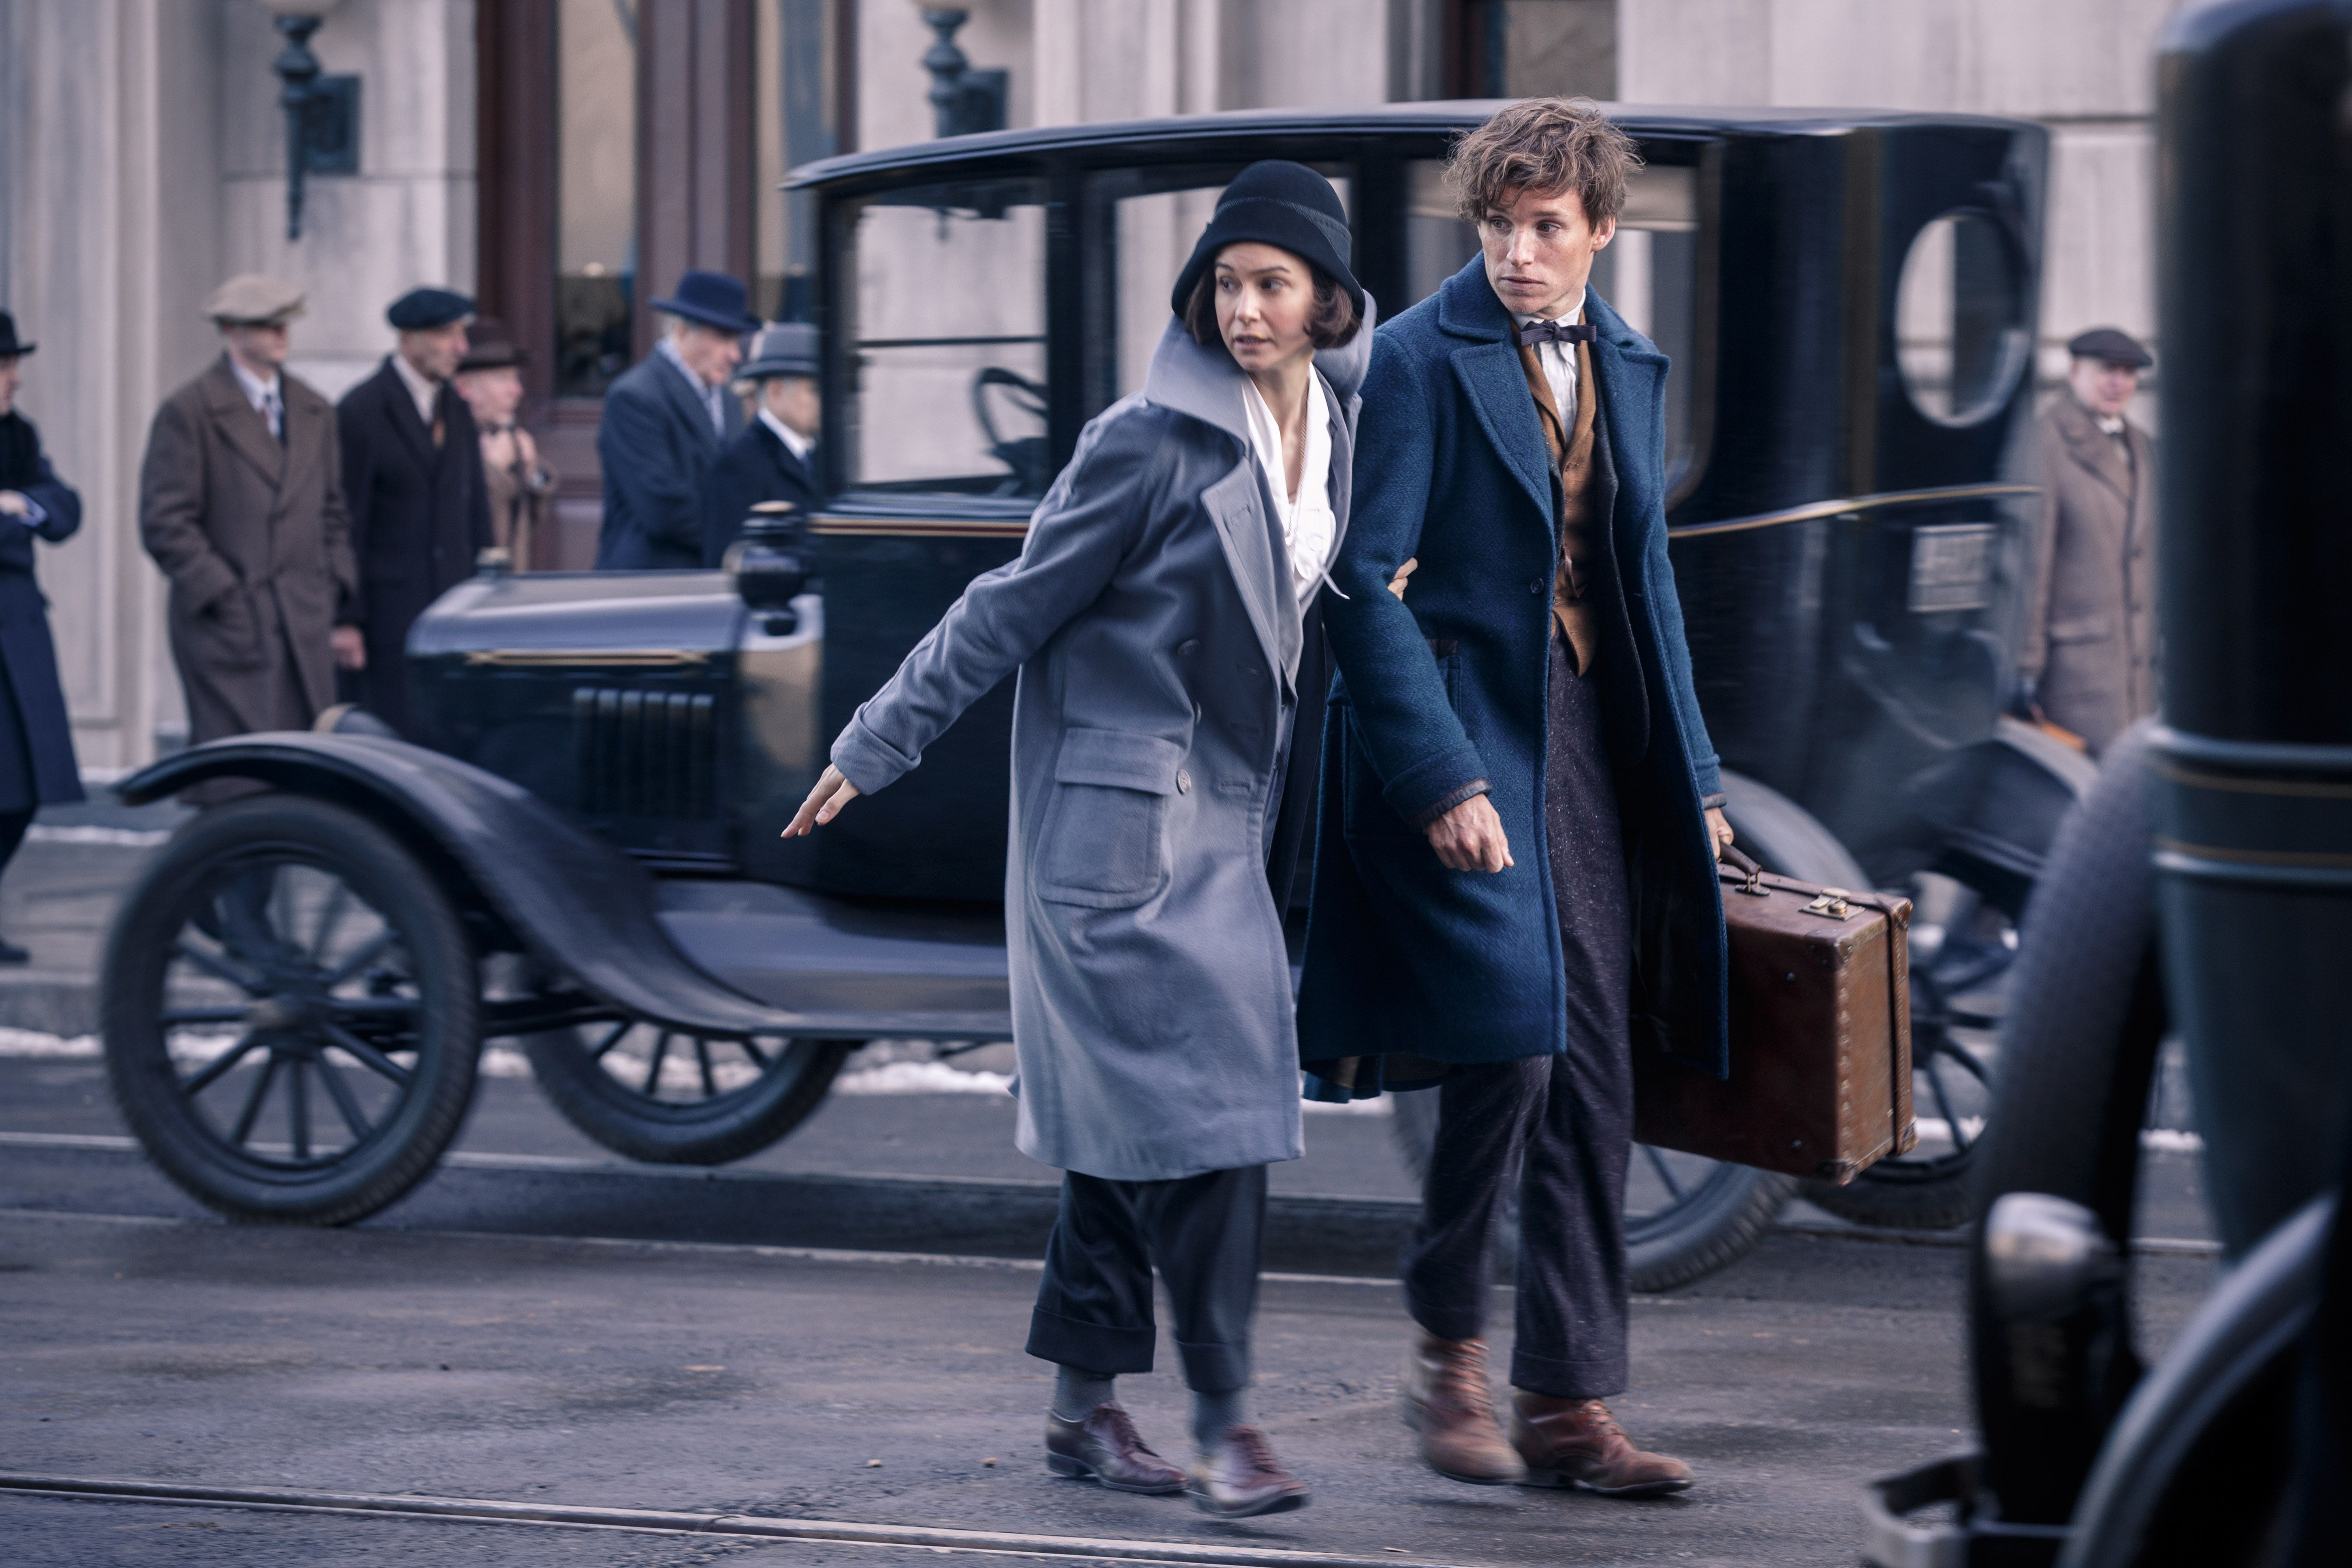 Fantastic Beasts And Where To Find Them 2 Cast Fantastic Beasts and Where to Find Them 2 Release Date | Collider